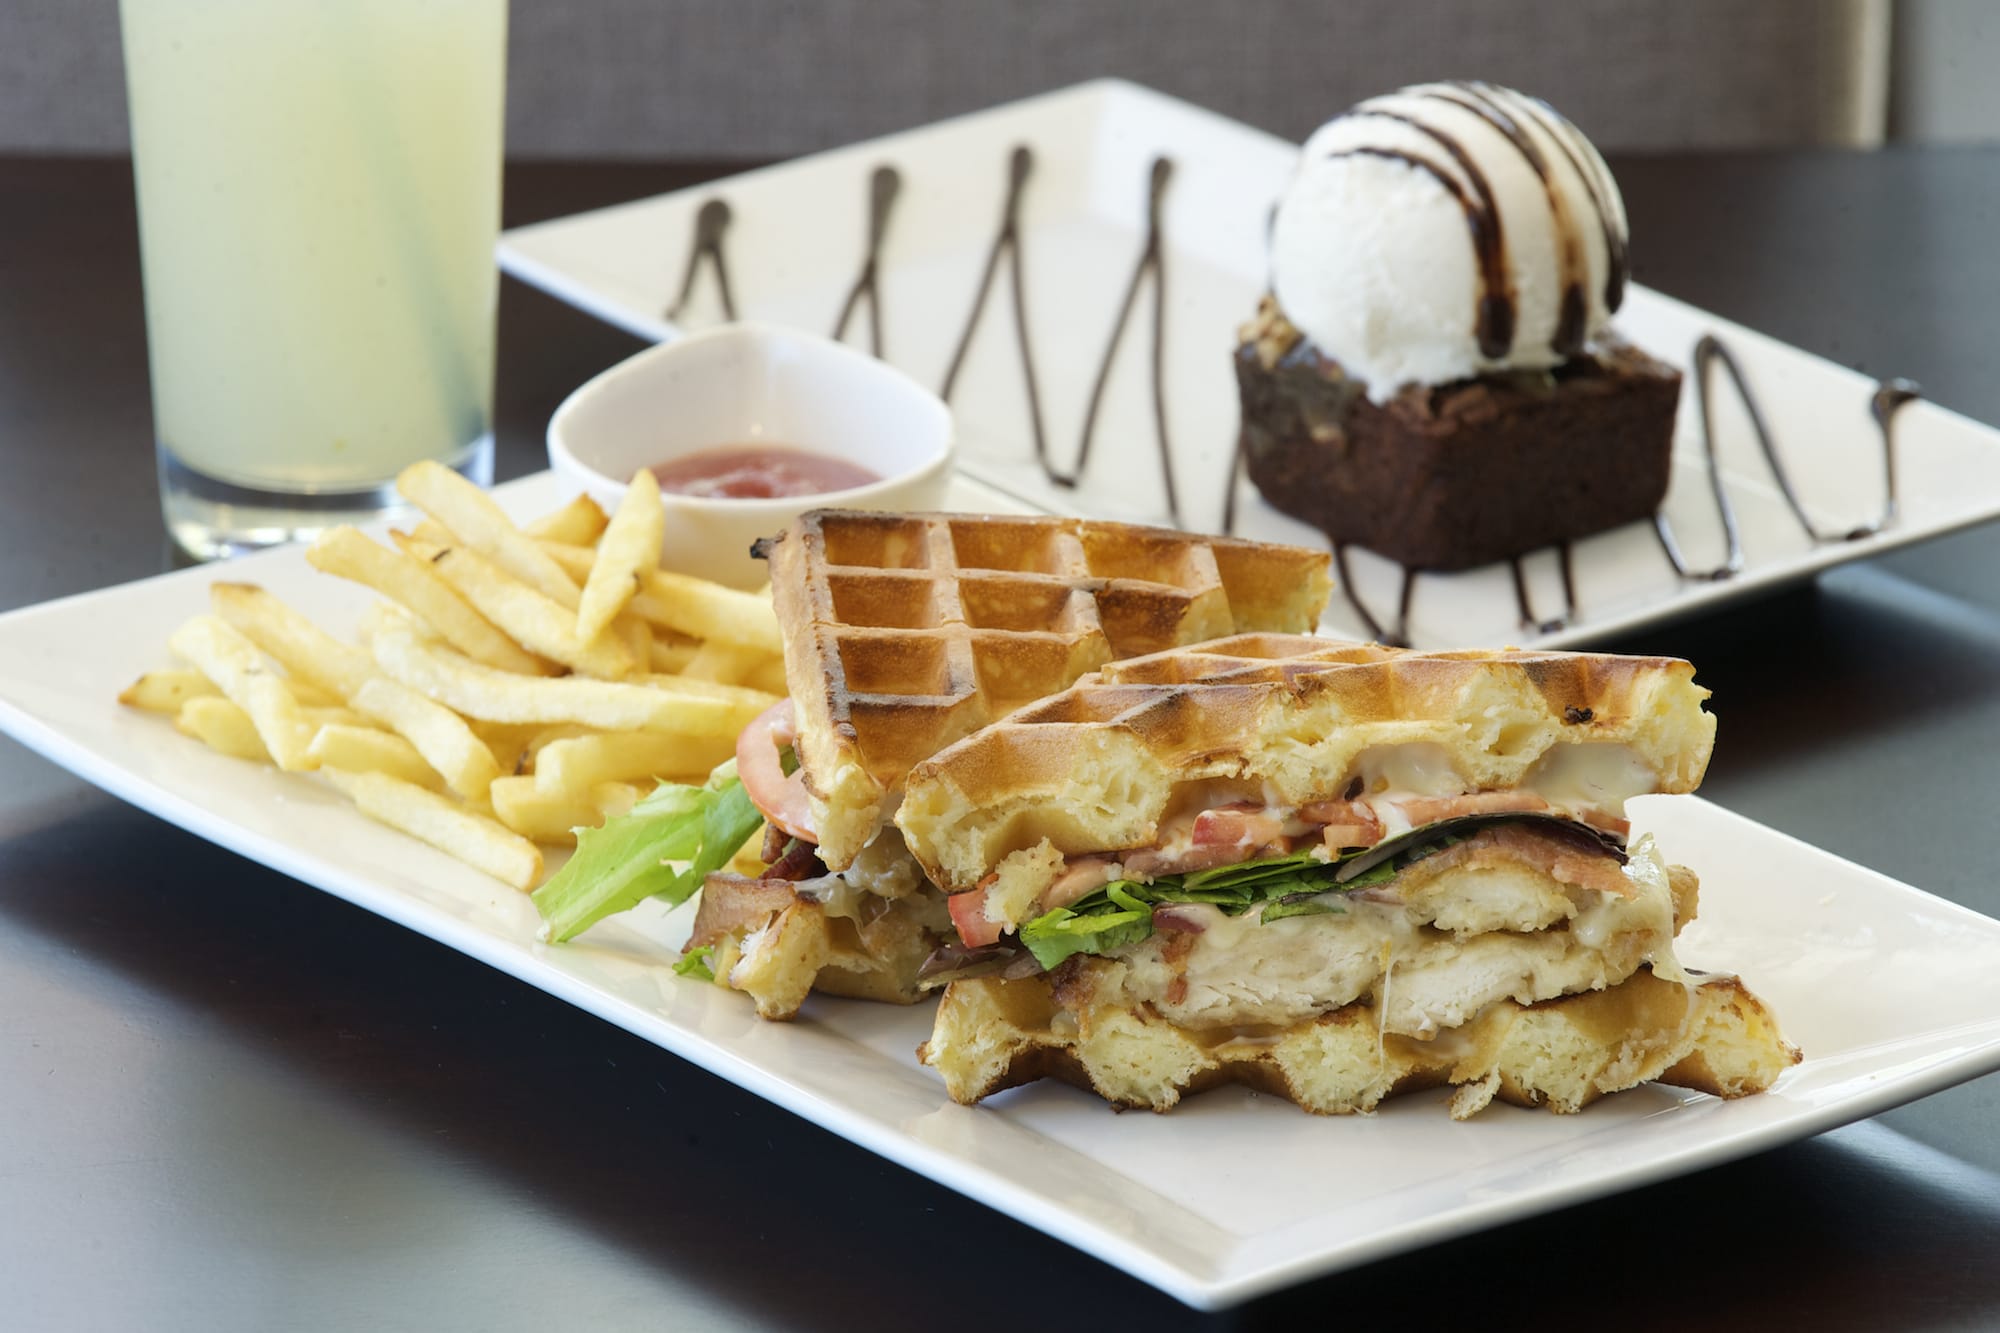 Luxe's chicken and waffle sandwich is stacked with greens, Gruy?re cheese, bacon, tomato and breaded chicken.